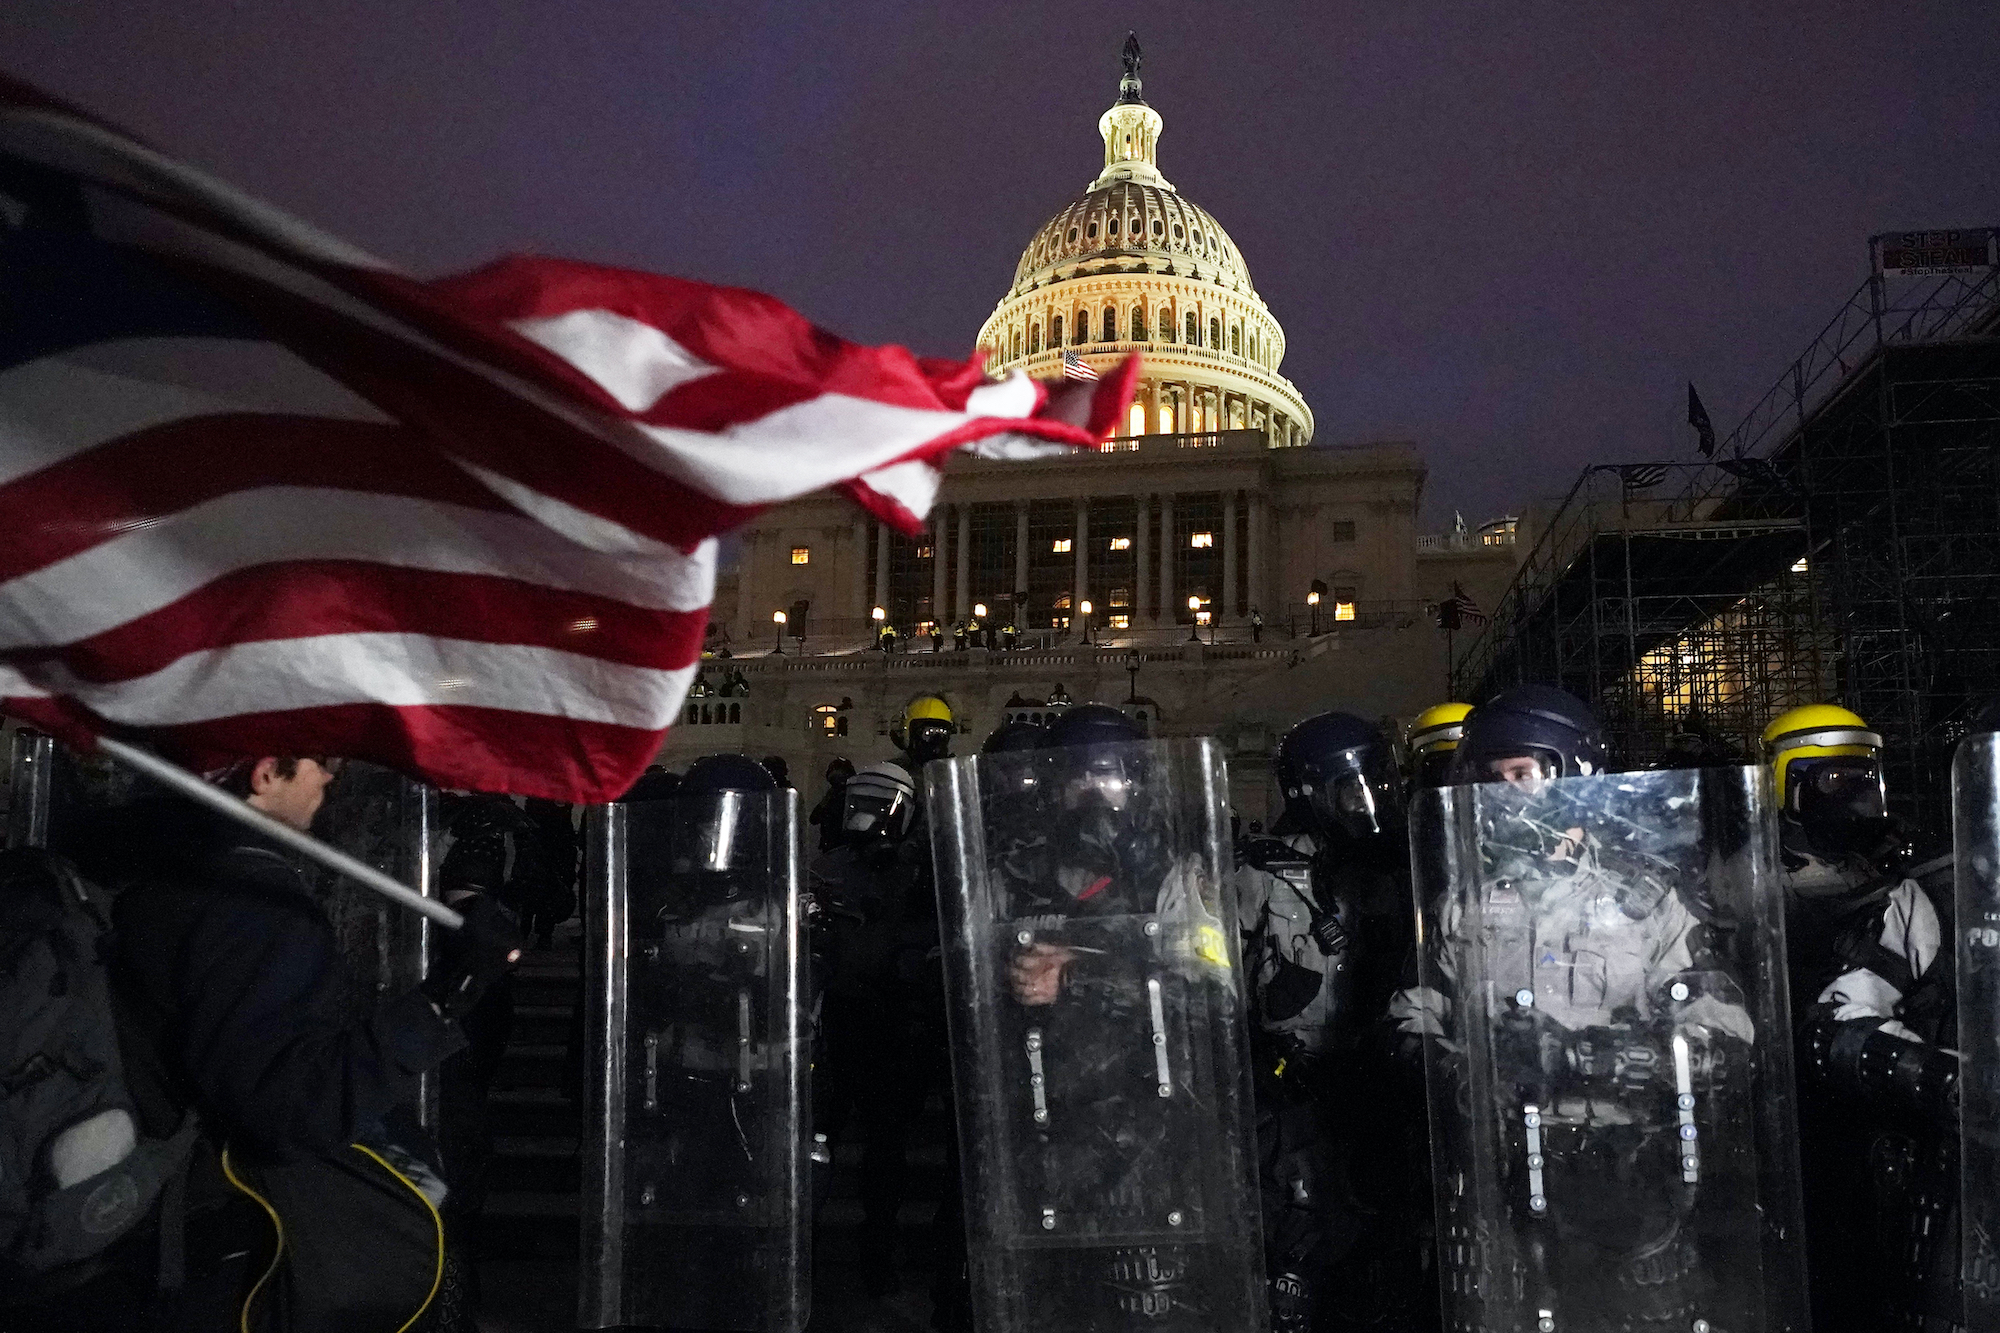 Riot police hold their shields in front of the U.S. Capitol, lit up at night, as a man with an American flag looks on